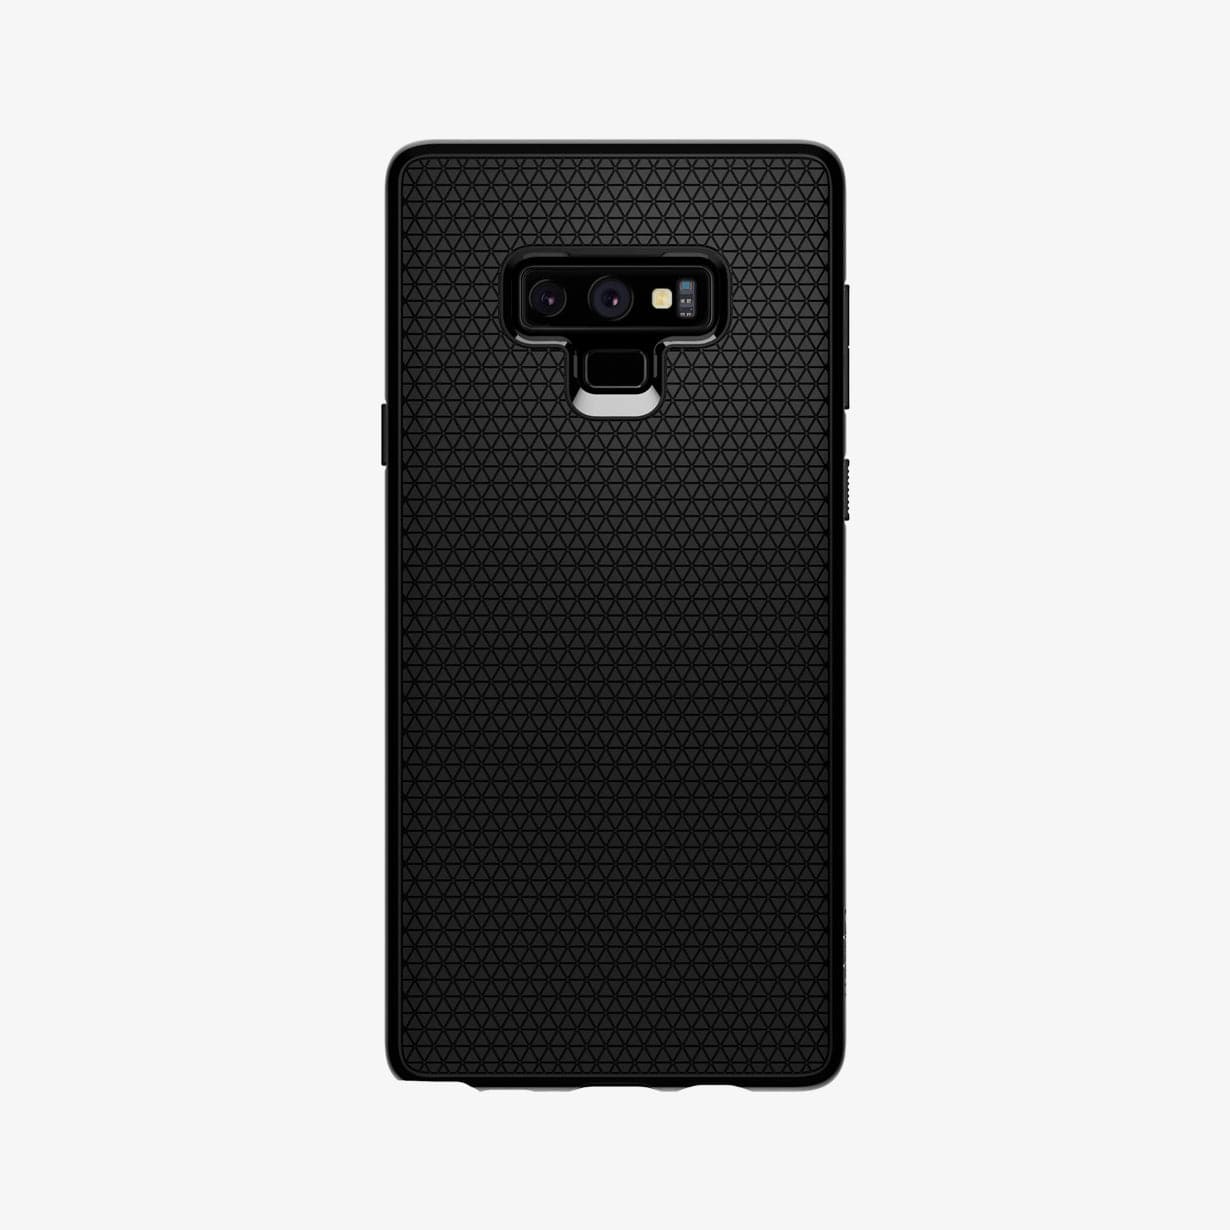 599CS24580 - Galaxy Note 9 Liquid Air Case in black showing the back